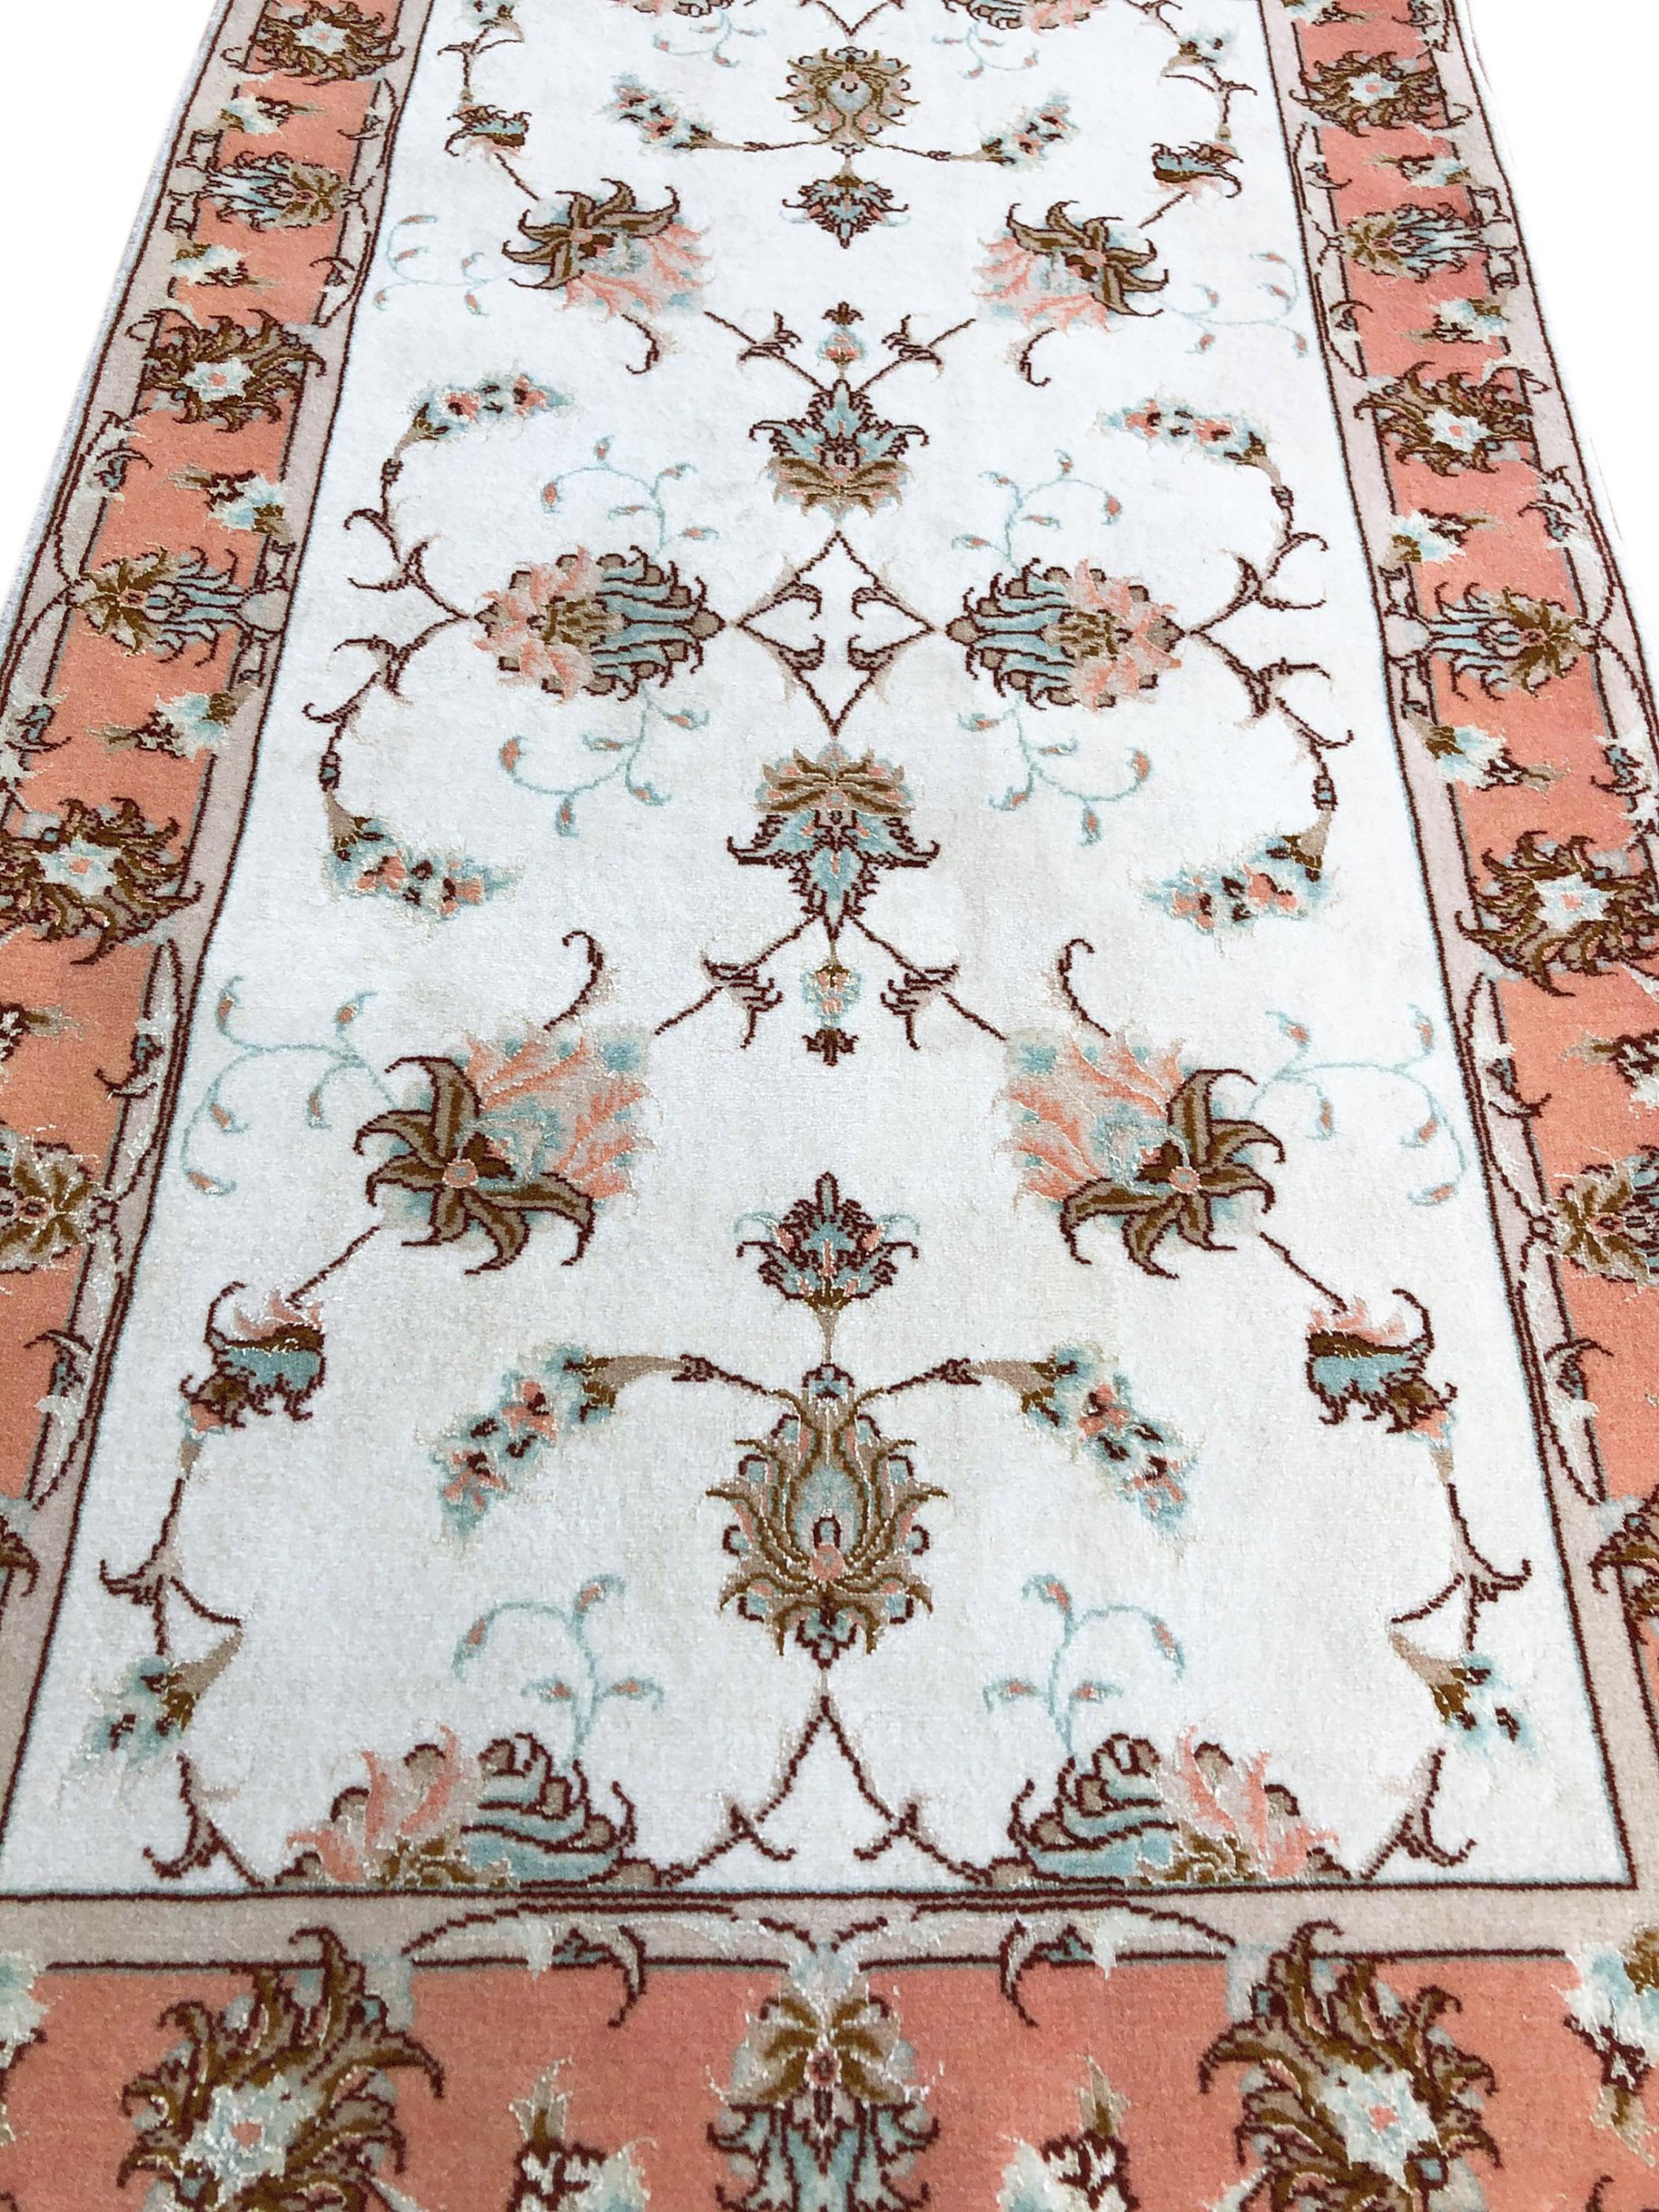 This rug is a hand knotted Persian Tabriz rug with a wool and silk pile on cotton foundation. Tabriz is one of the oldest rug weaving centers and makes a huge diversity of types of rugs. This rug features a semi-floral all-over pattern which has